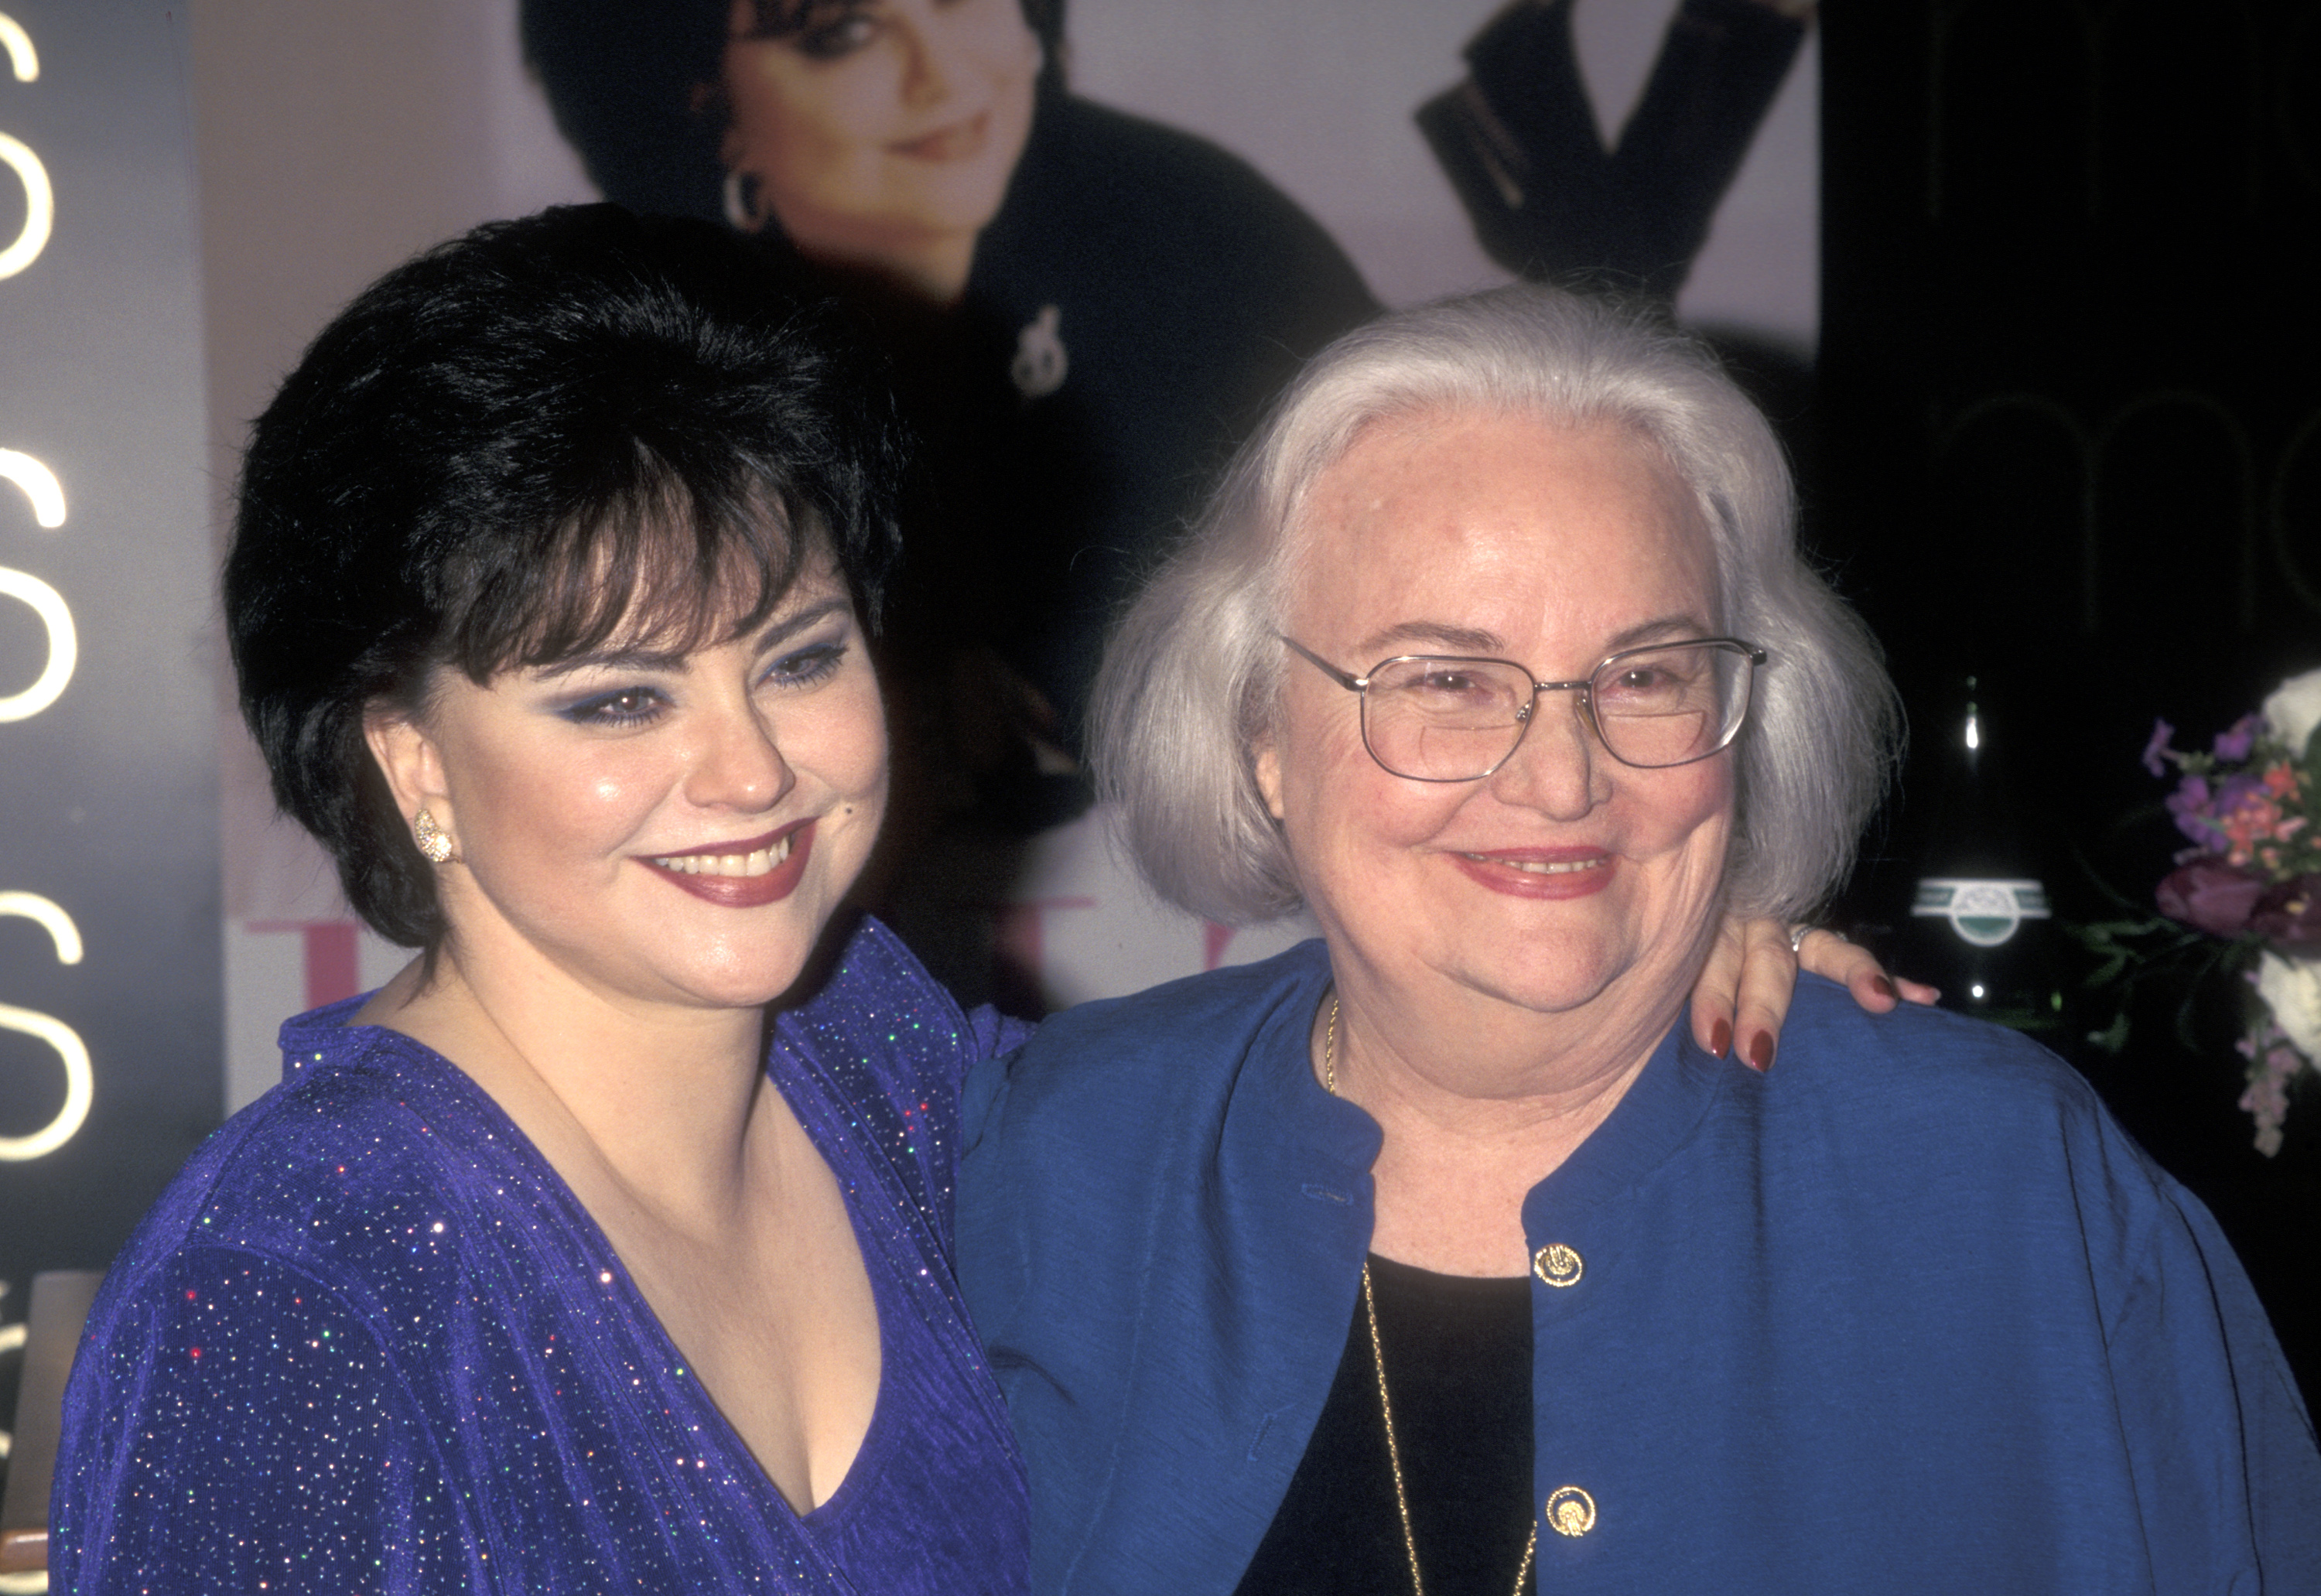 Delta Burke and her mother at the launch of Burke's clothing line at Macy's Herald Square in New York City | Source: Getty Images